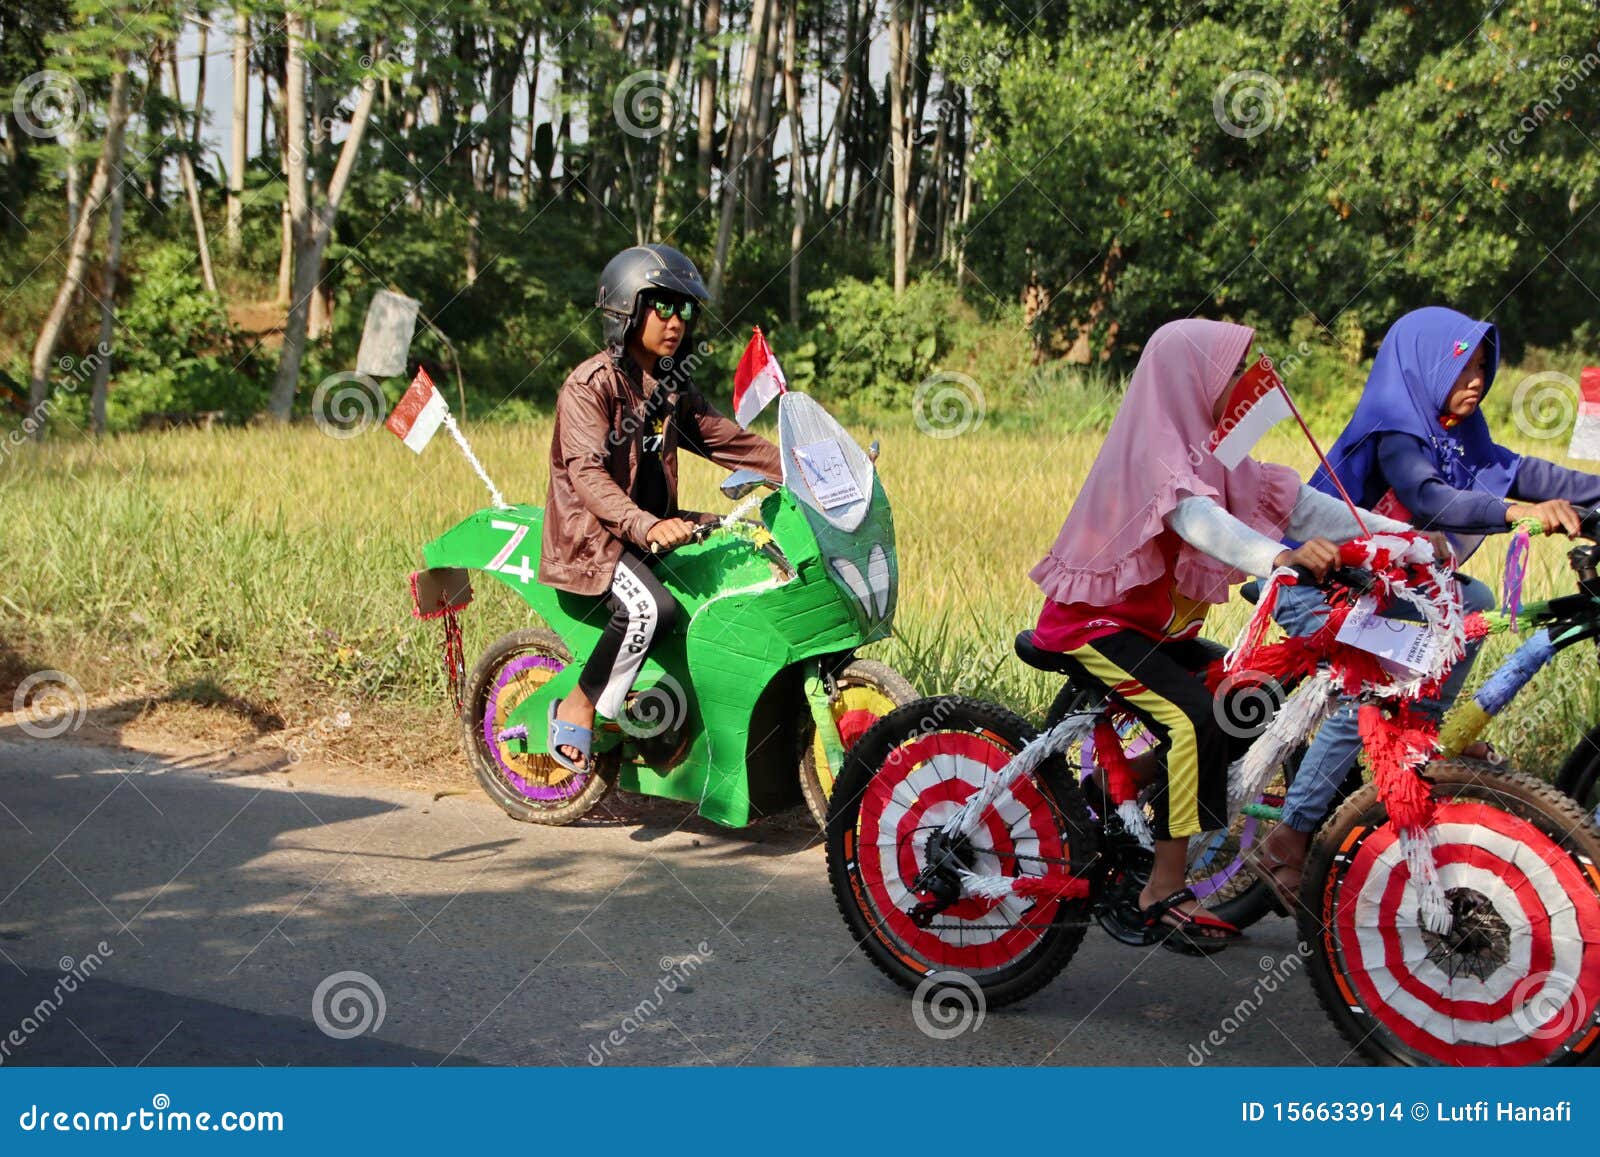 Bike Parade Commemorates The Independence Day Of The Republic Of